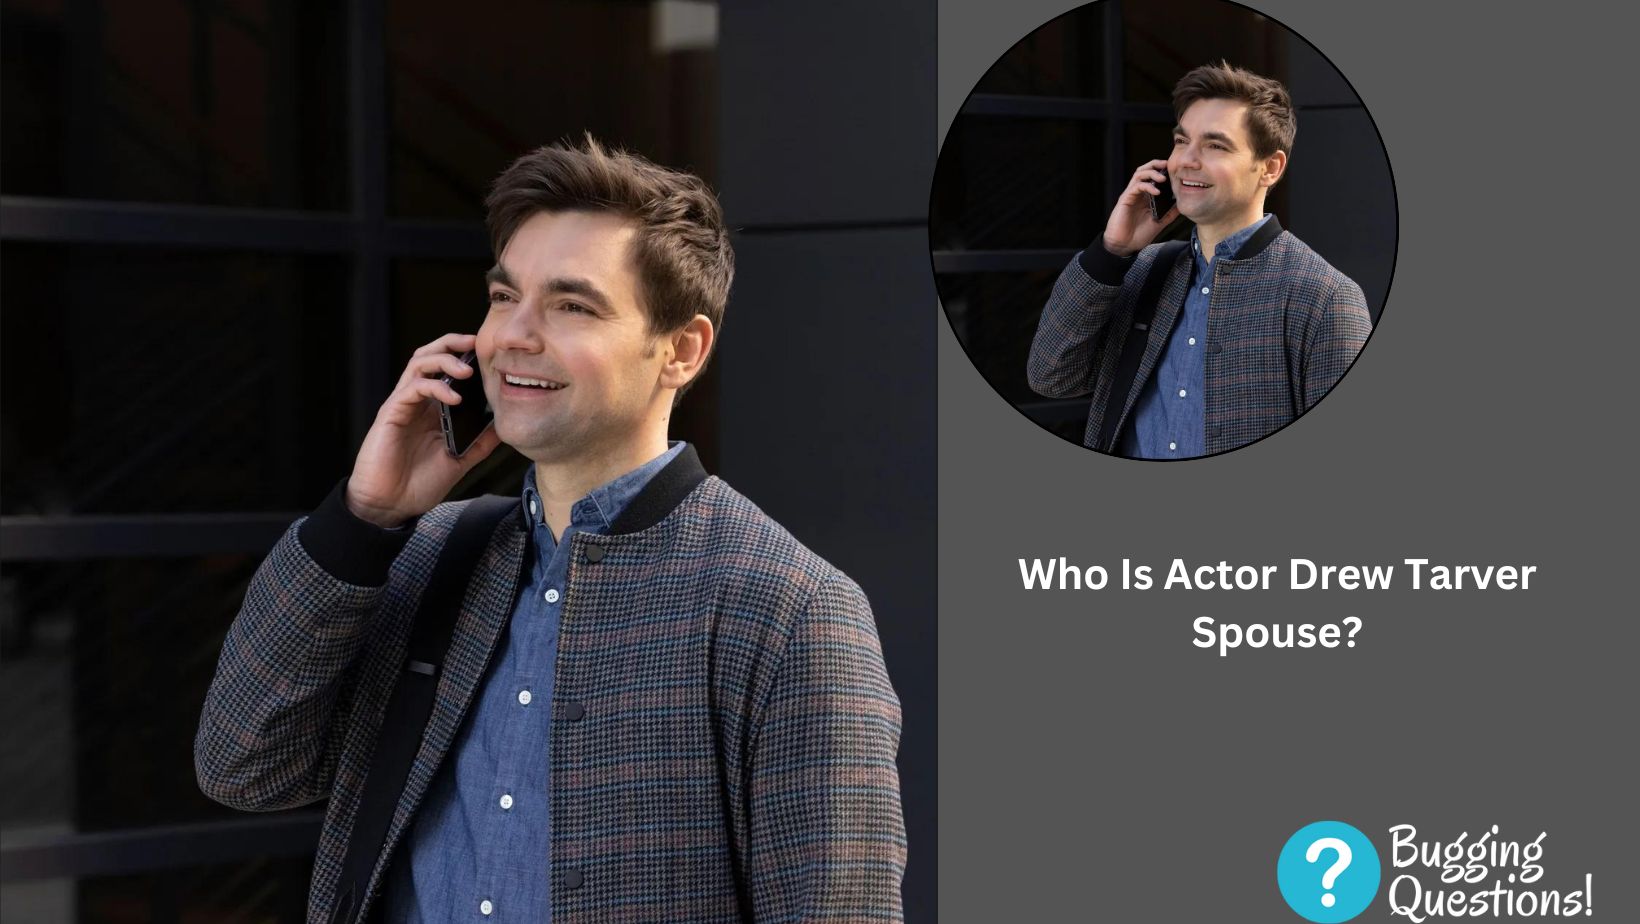 Who Is Actor Drew Tarver Spouse?